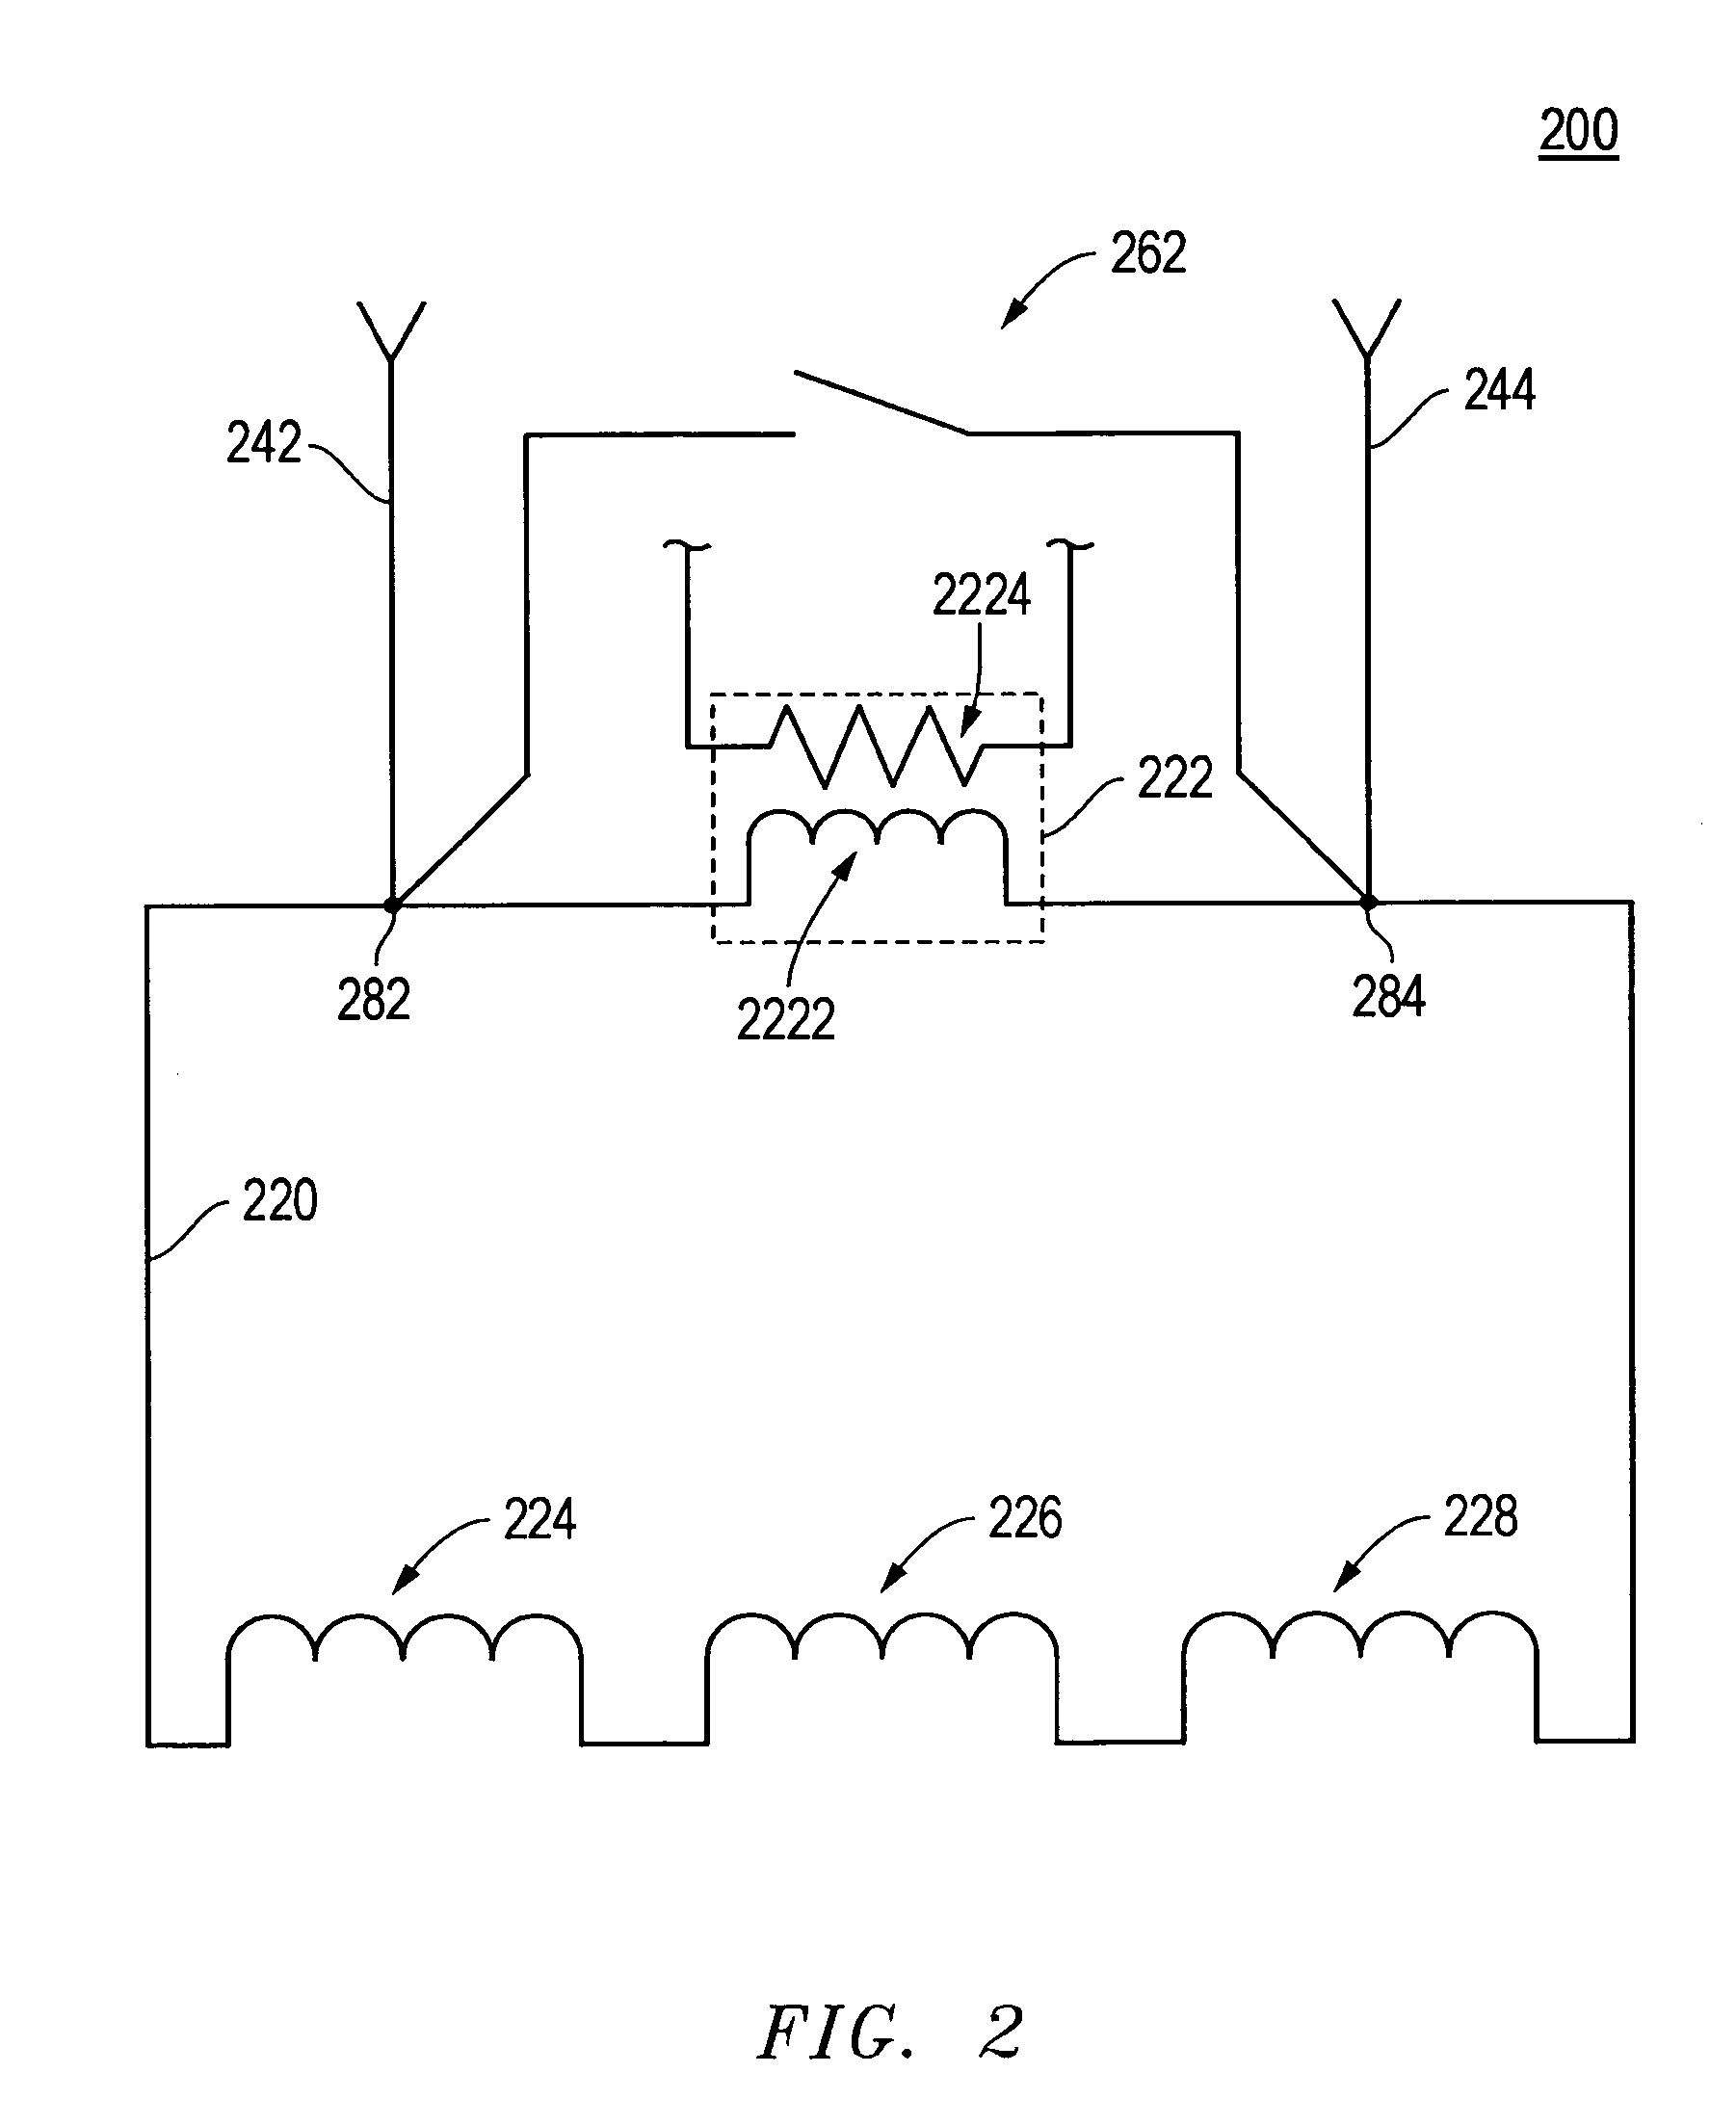 Circuit including a superconducting element and a switch, a system including the circuit, and a method of using the system